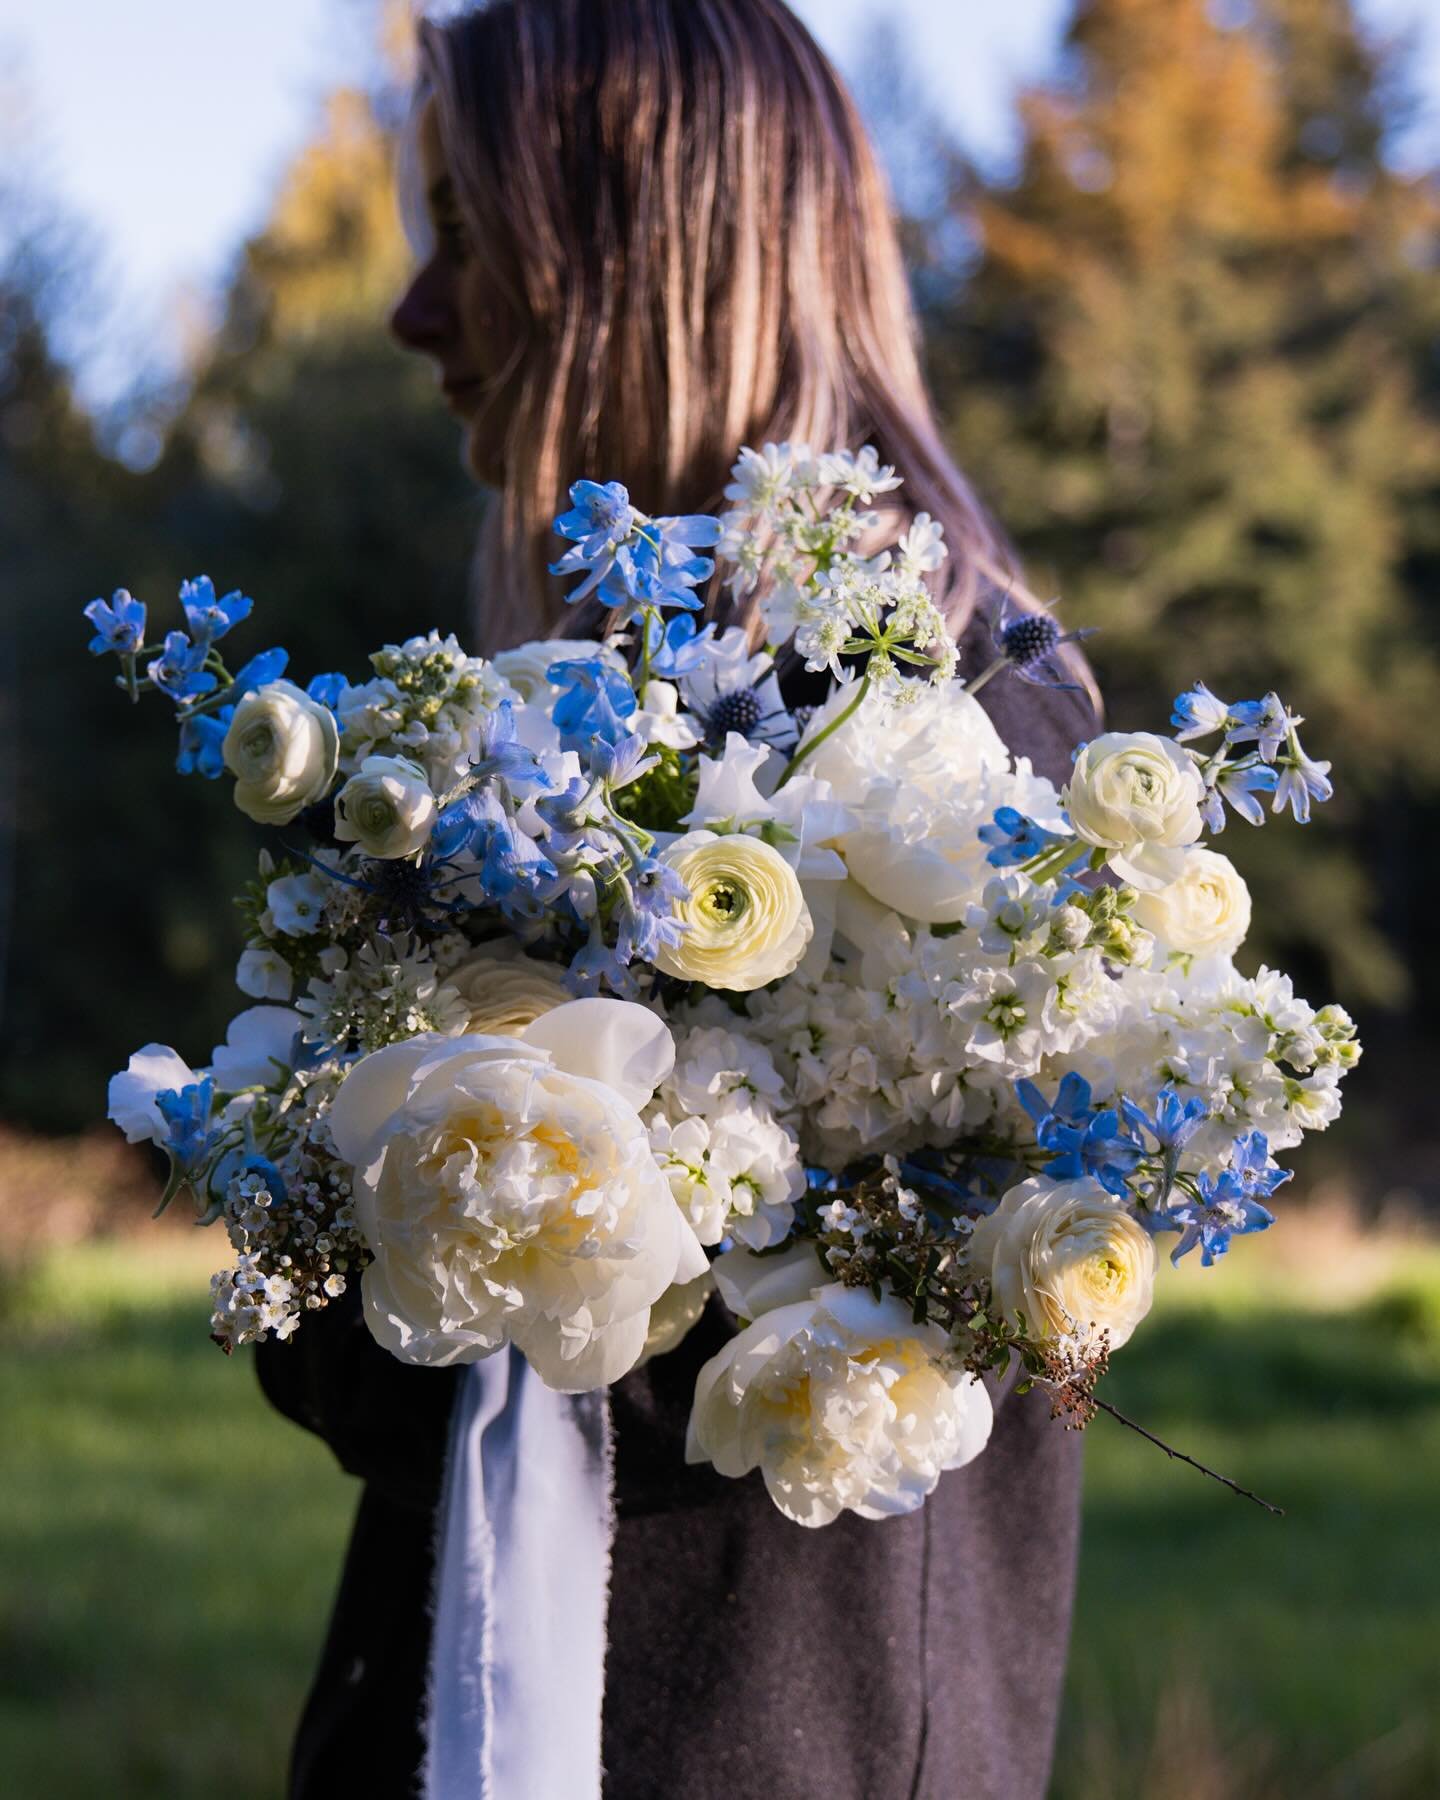 Still thinking about this dreamy bridal bouquet! There is something so fresh about the white and blue palette 🤍

Hope everyone is have a fantastic long weekend! Who else is getting more excited for summer 🙋🏼&zwj;♀️